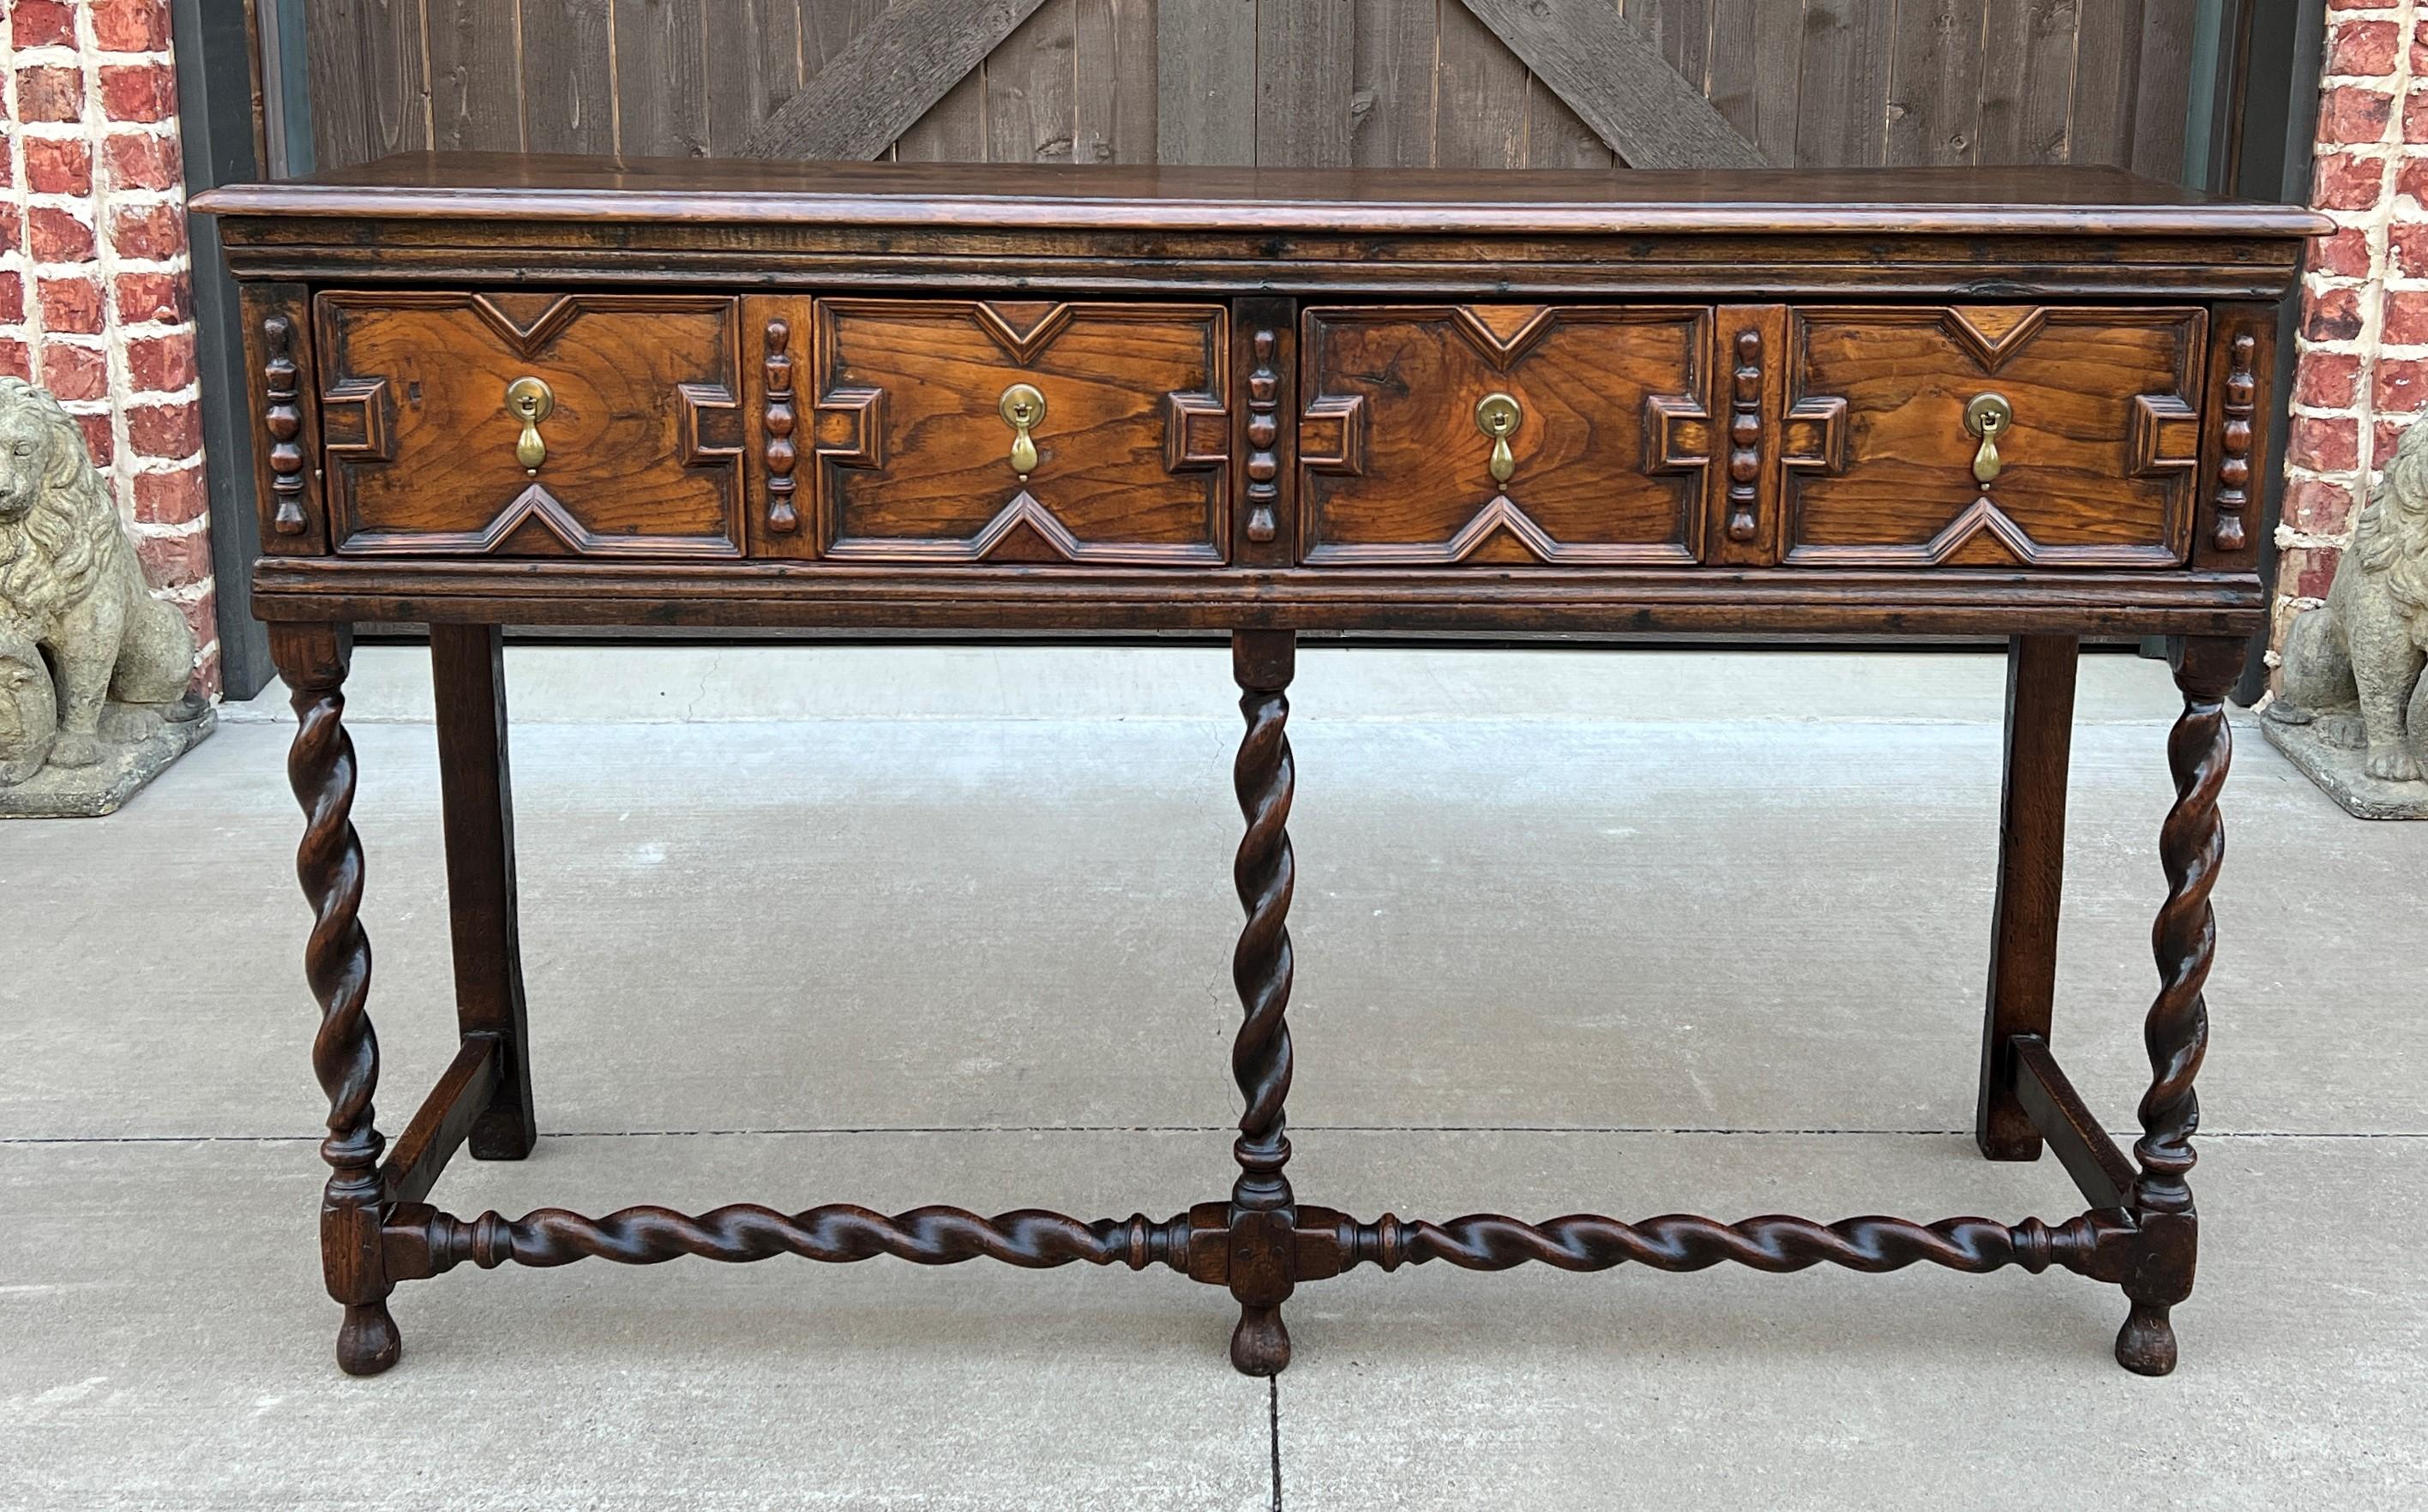 Gorgeous antique English oak Jacobean barley twist server, sideboard, sofa table, console, or buffet with two center drawers~~c. 1890s


Full of character and classic~~English Jacobean style sideboard or sofa table with barley twist legs~~display